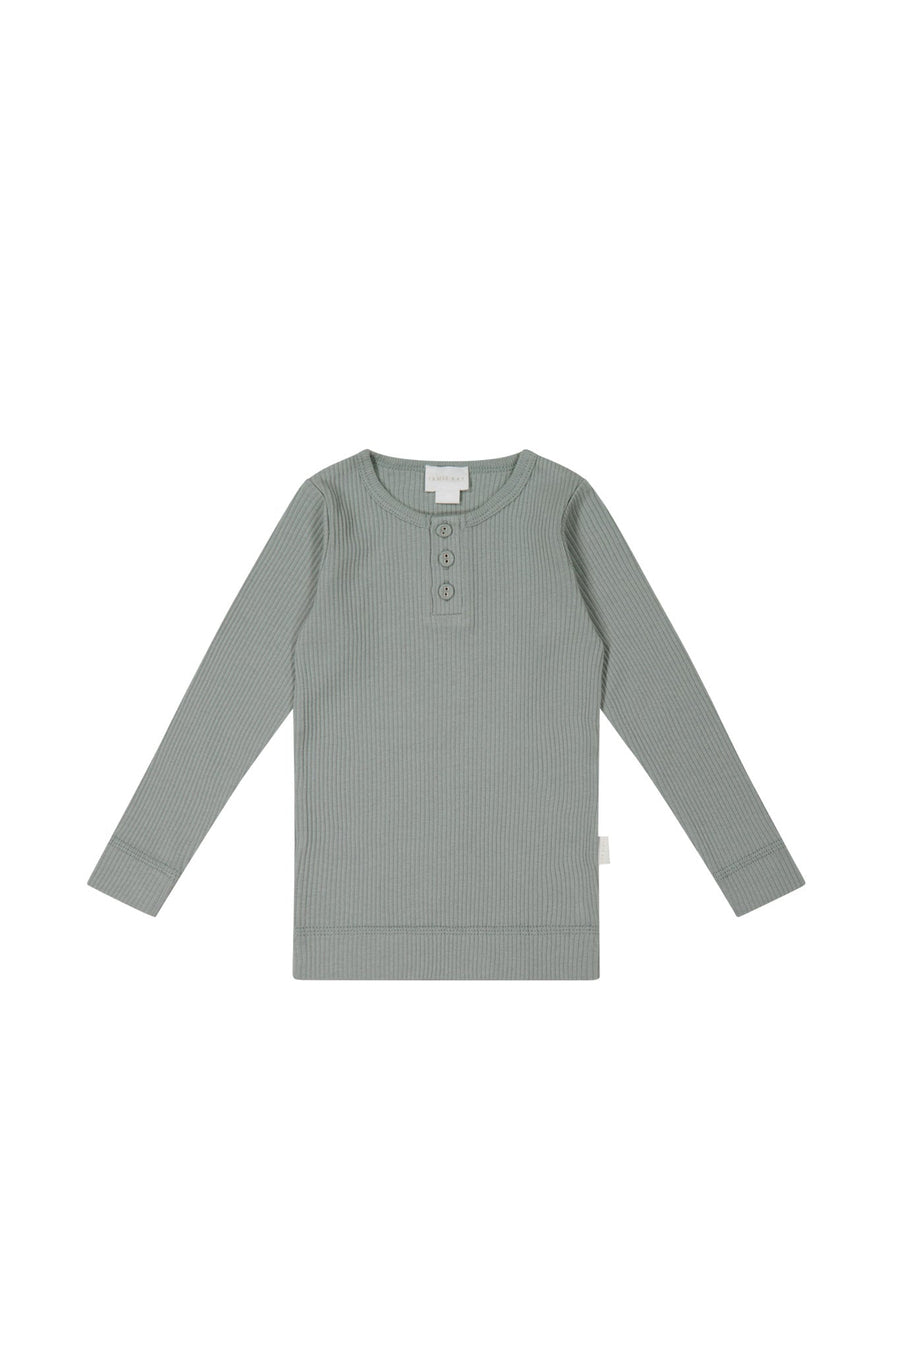 Organic Cotton Modal Long Sleeve Henley - Dawn Childrens Top from Jamie Kay USA